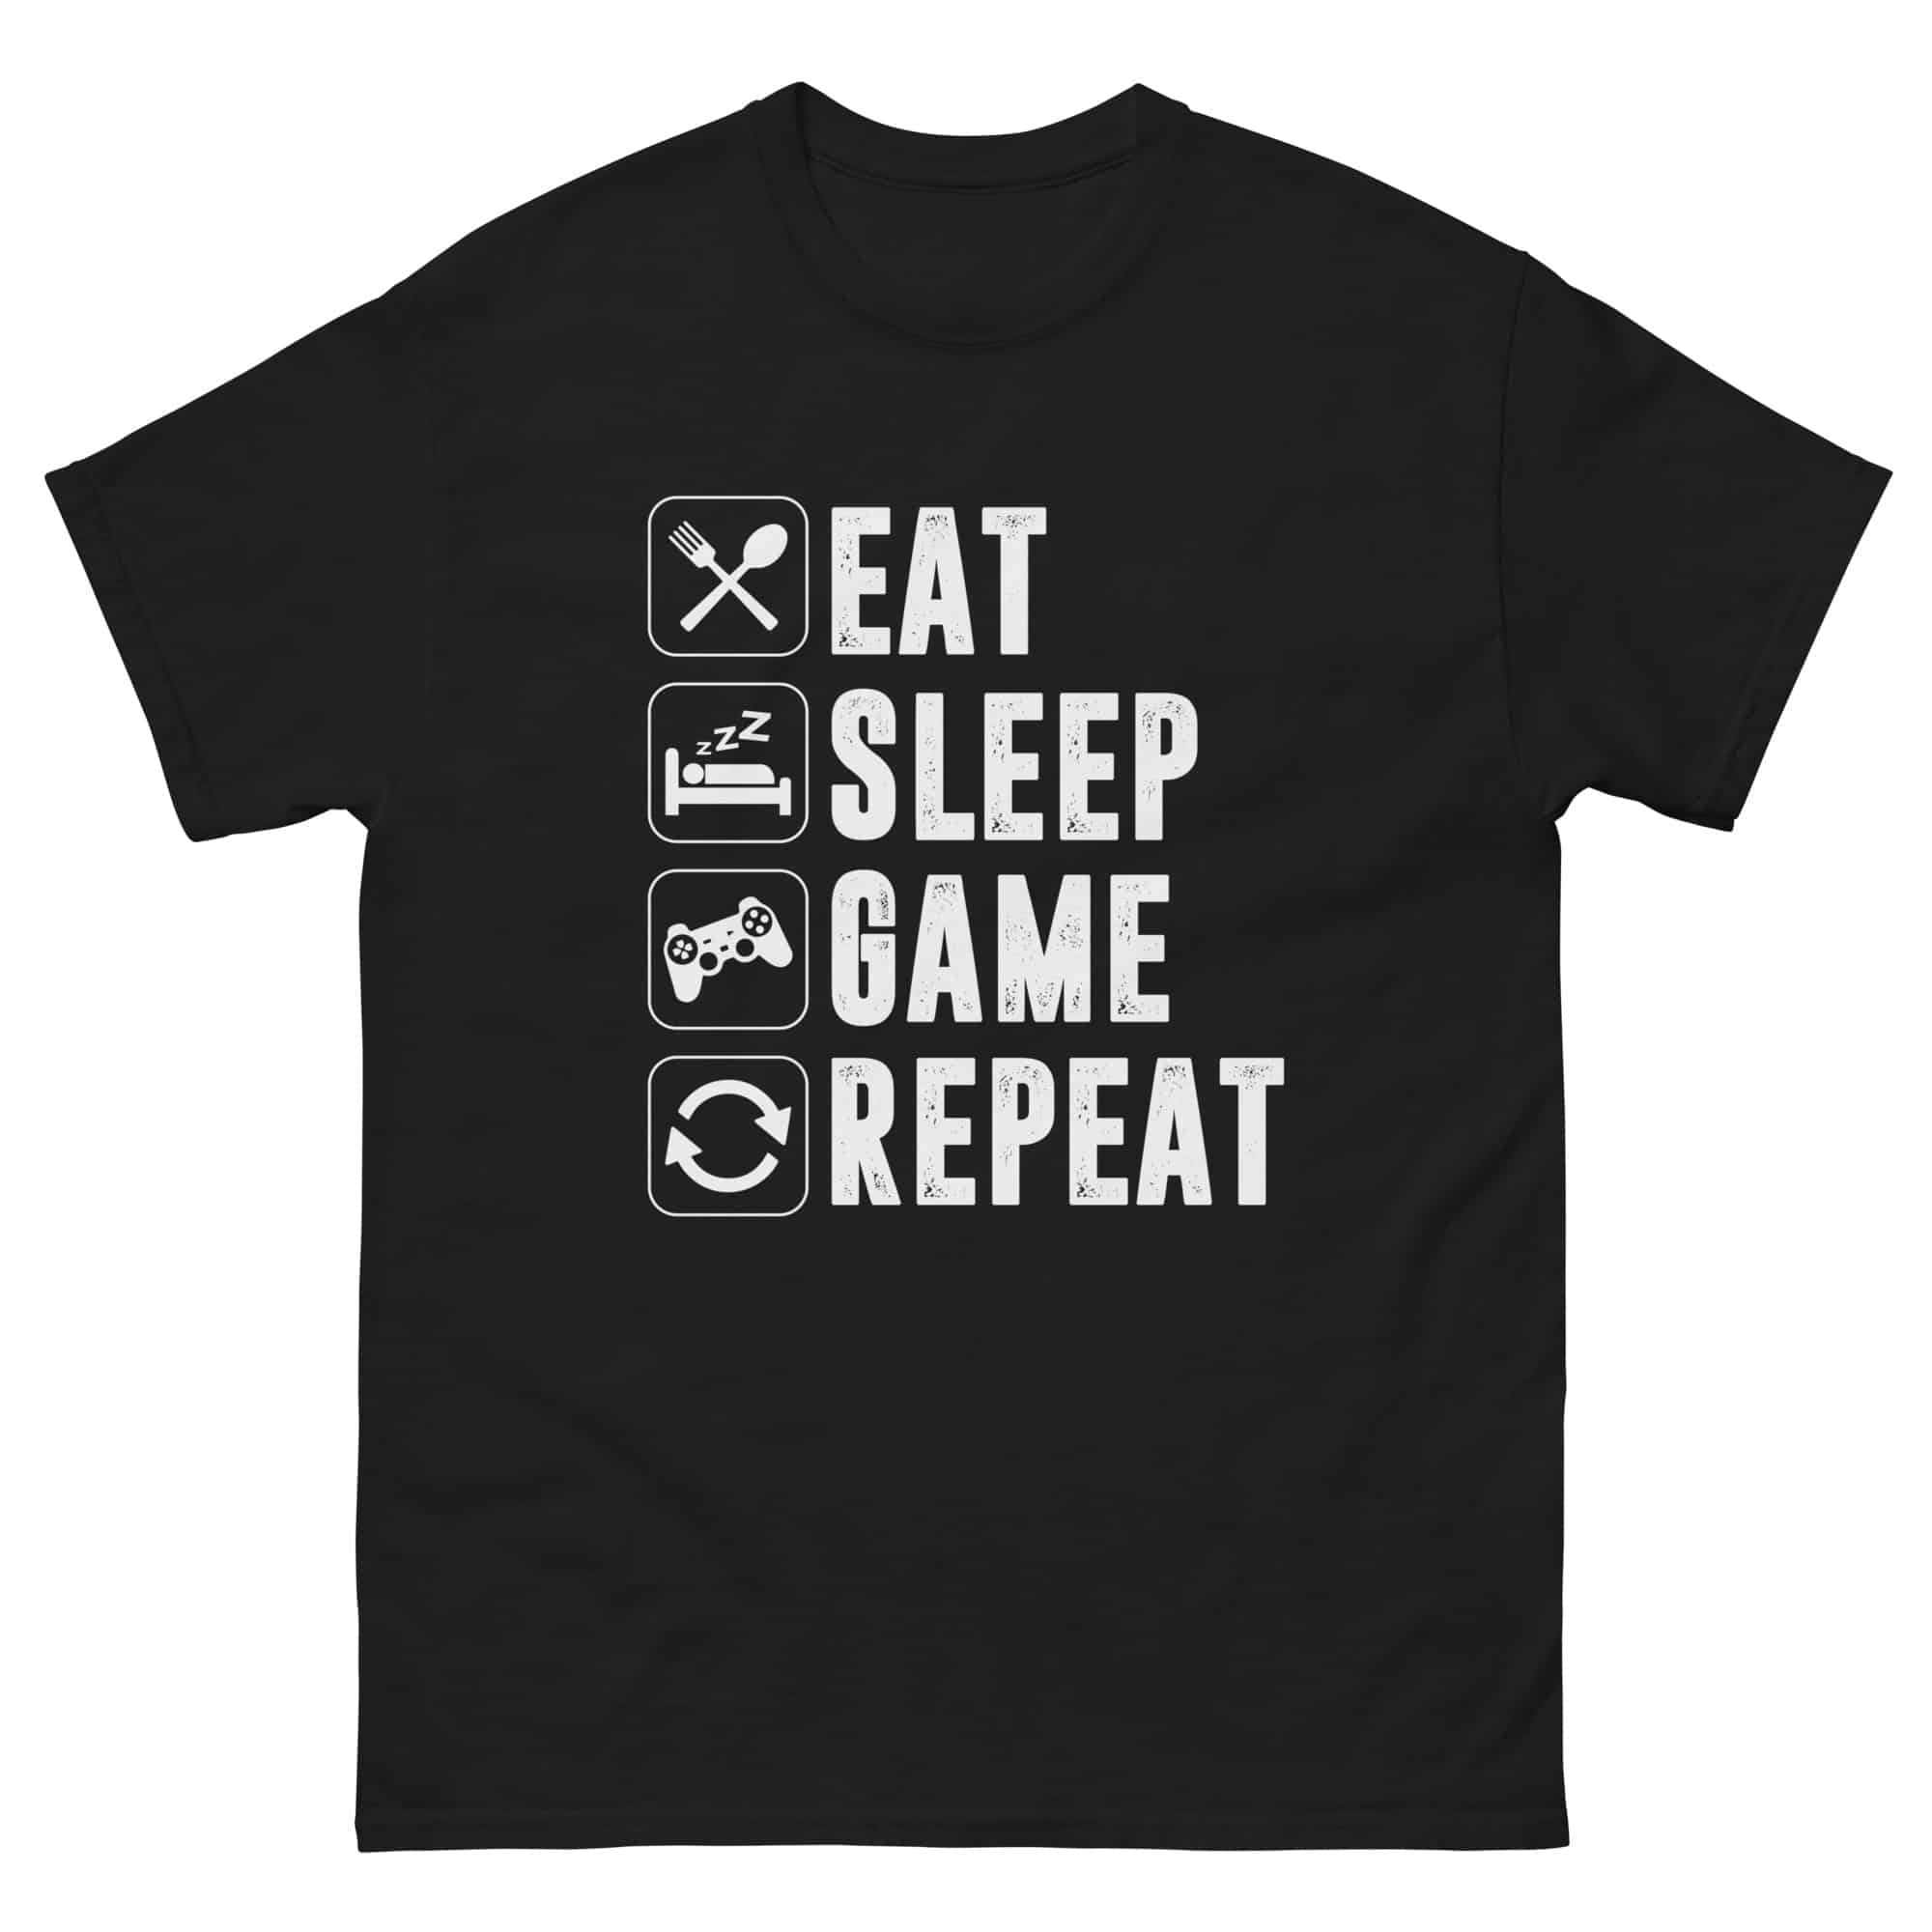 Eat Sleep Game Repeat Shirt Men's graphic t-shirts Men's designer shirts Premium sweatshirts Unisex hoodies Premium hooded sweatshirts Designer sweatshirts High-quality sweatshirts Luxury sweatshirts Unisex fleece sweatshirts Premium pullover sweatshirts Unisex heavyweight sweatshirts Premium cotton sweatshirts Video game store Gaming merchandise Gaming accessories shop Online gaming store Video game shop near me Gaming console store PC gaming store Gaming gear shop Retro gaming shop Board game shop Anime merchandise Anime store online Japanese anime shop Anime figurines Manga shop Anime DVDs Anime accessories Anime apparel Anime collectibles Anime gifts